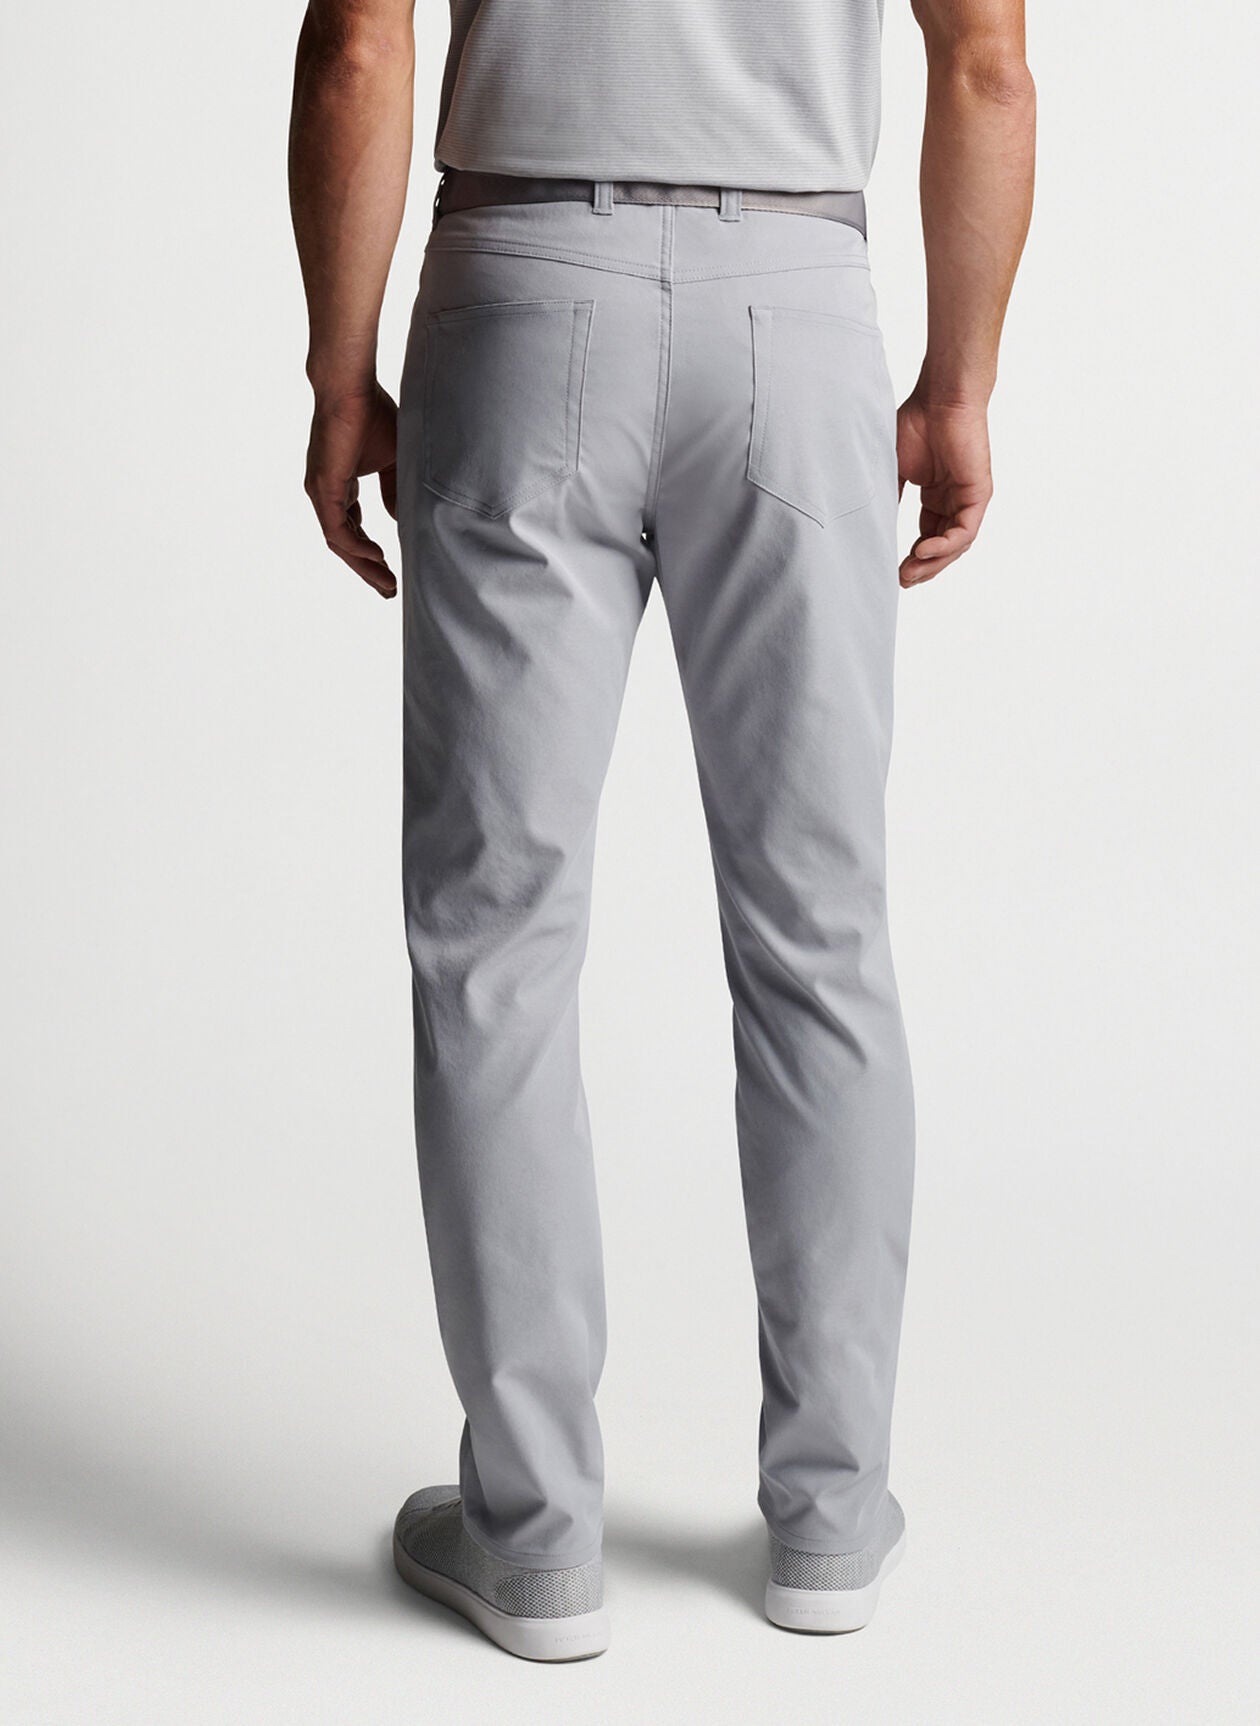 Peter Millar eb66 Performance Five-Pocket Pant In Gale Grey – The Oxford  Shop